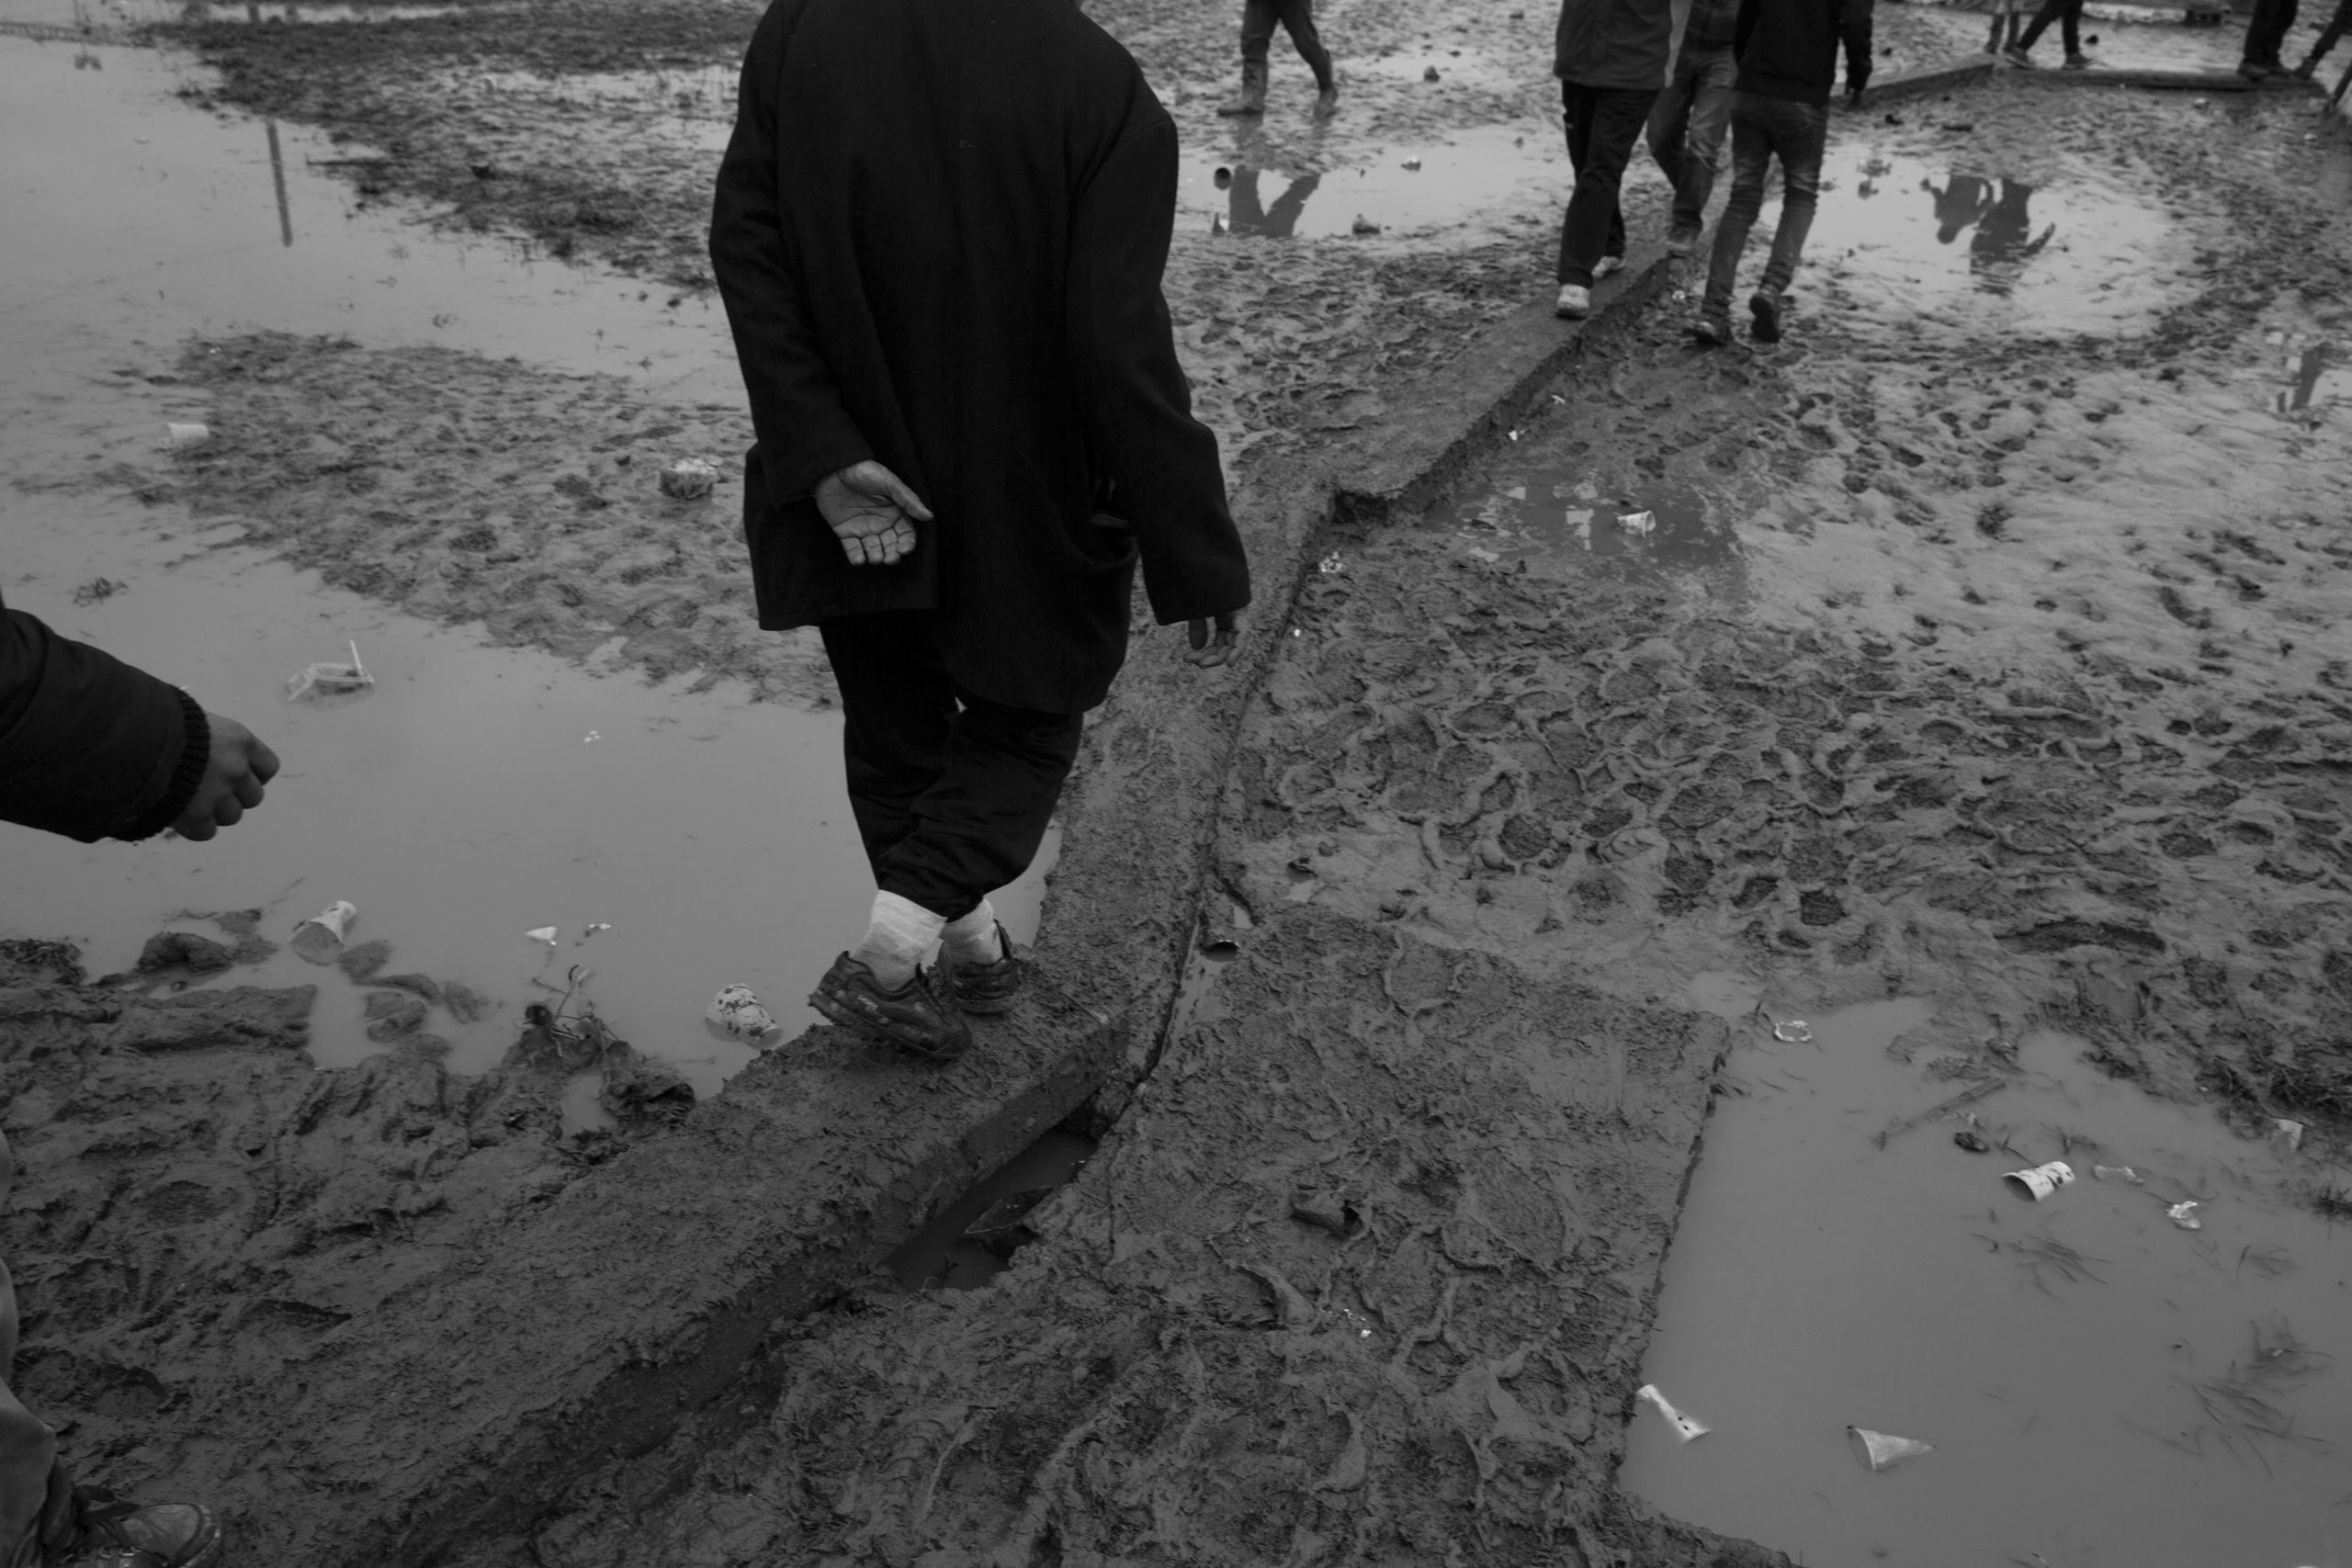 Refugees at the Idomeni camp at the border of Greece and Macedonia, where they have been stranded in the rain, mud and cold, March 16, 2016.